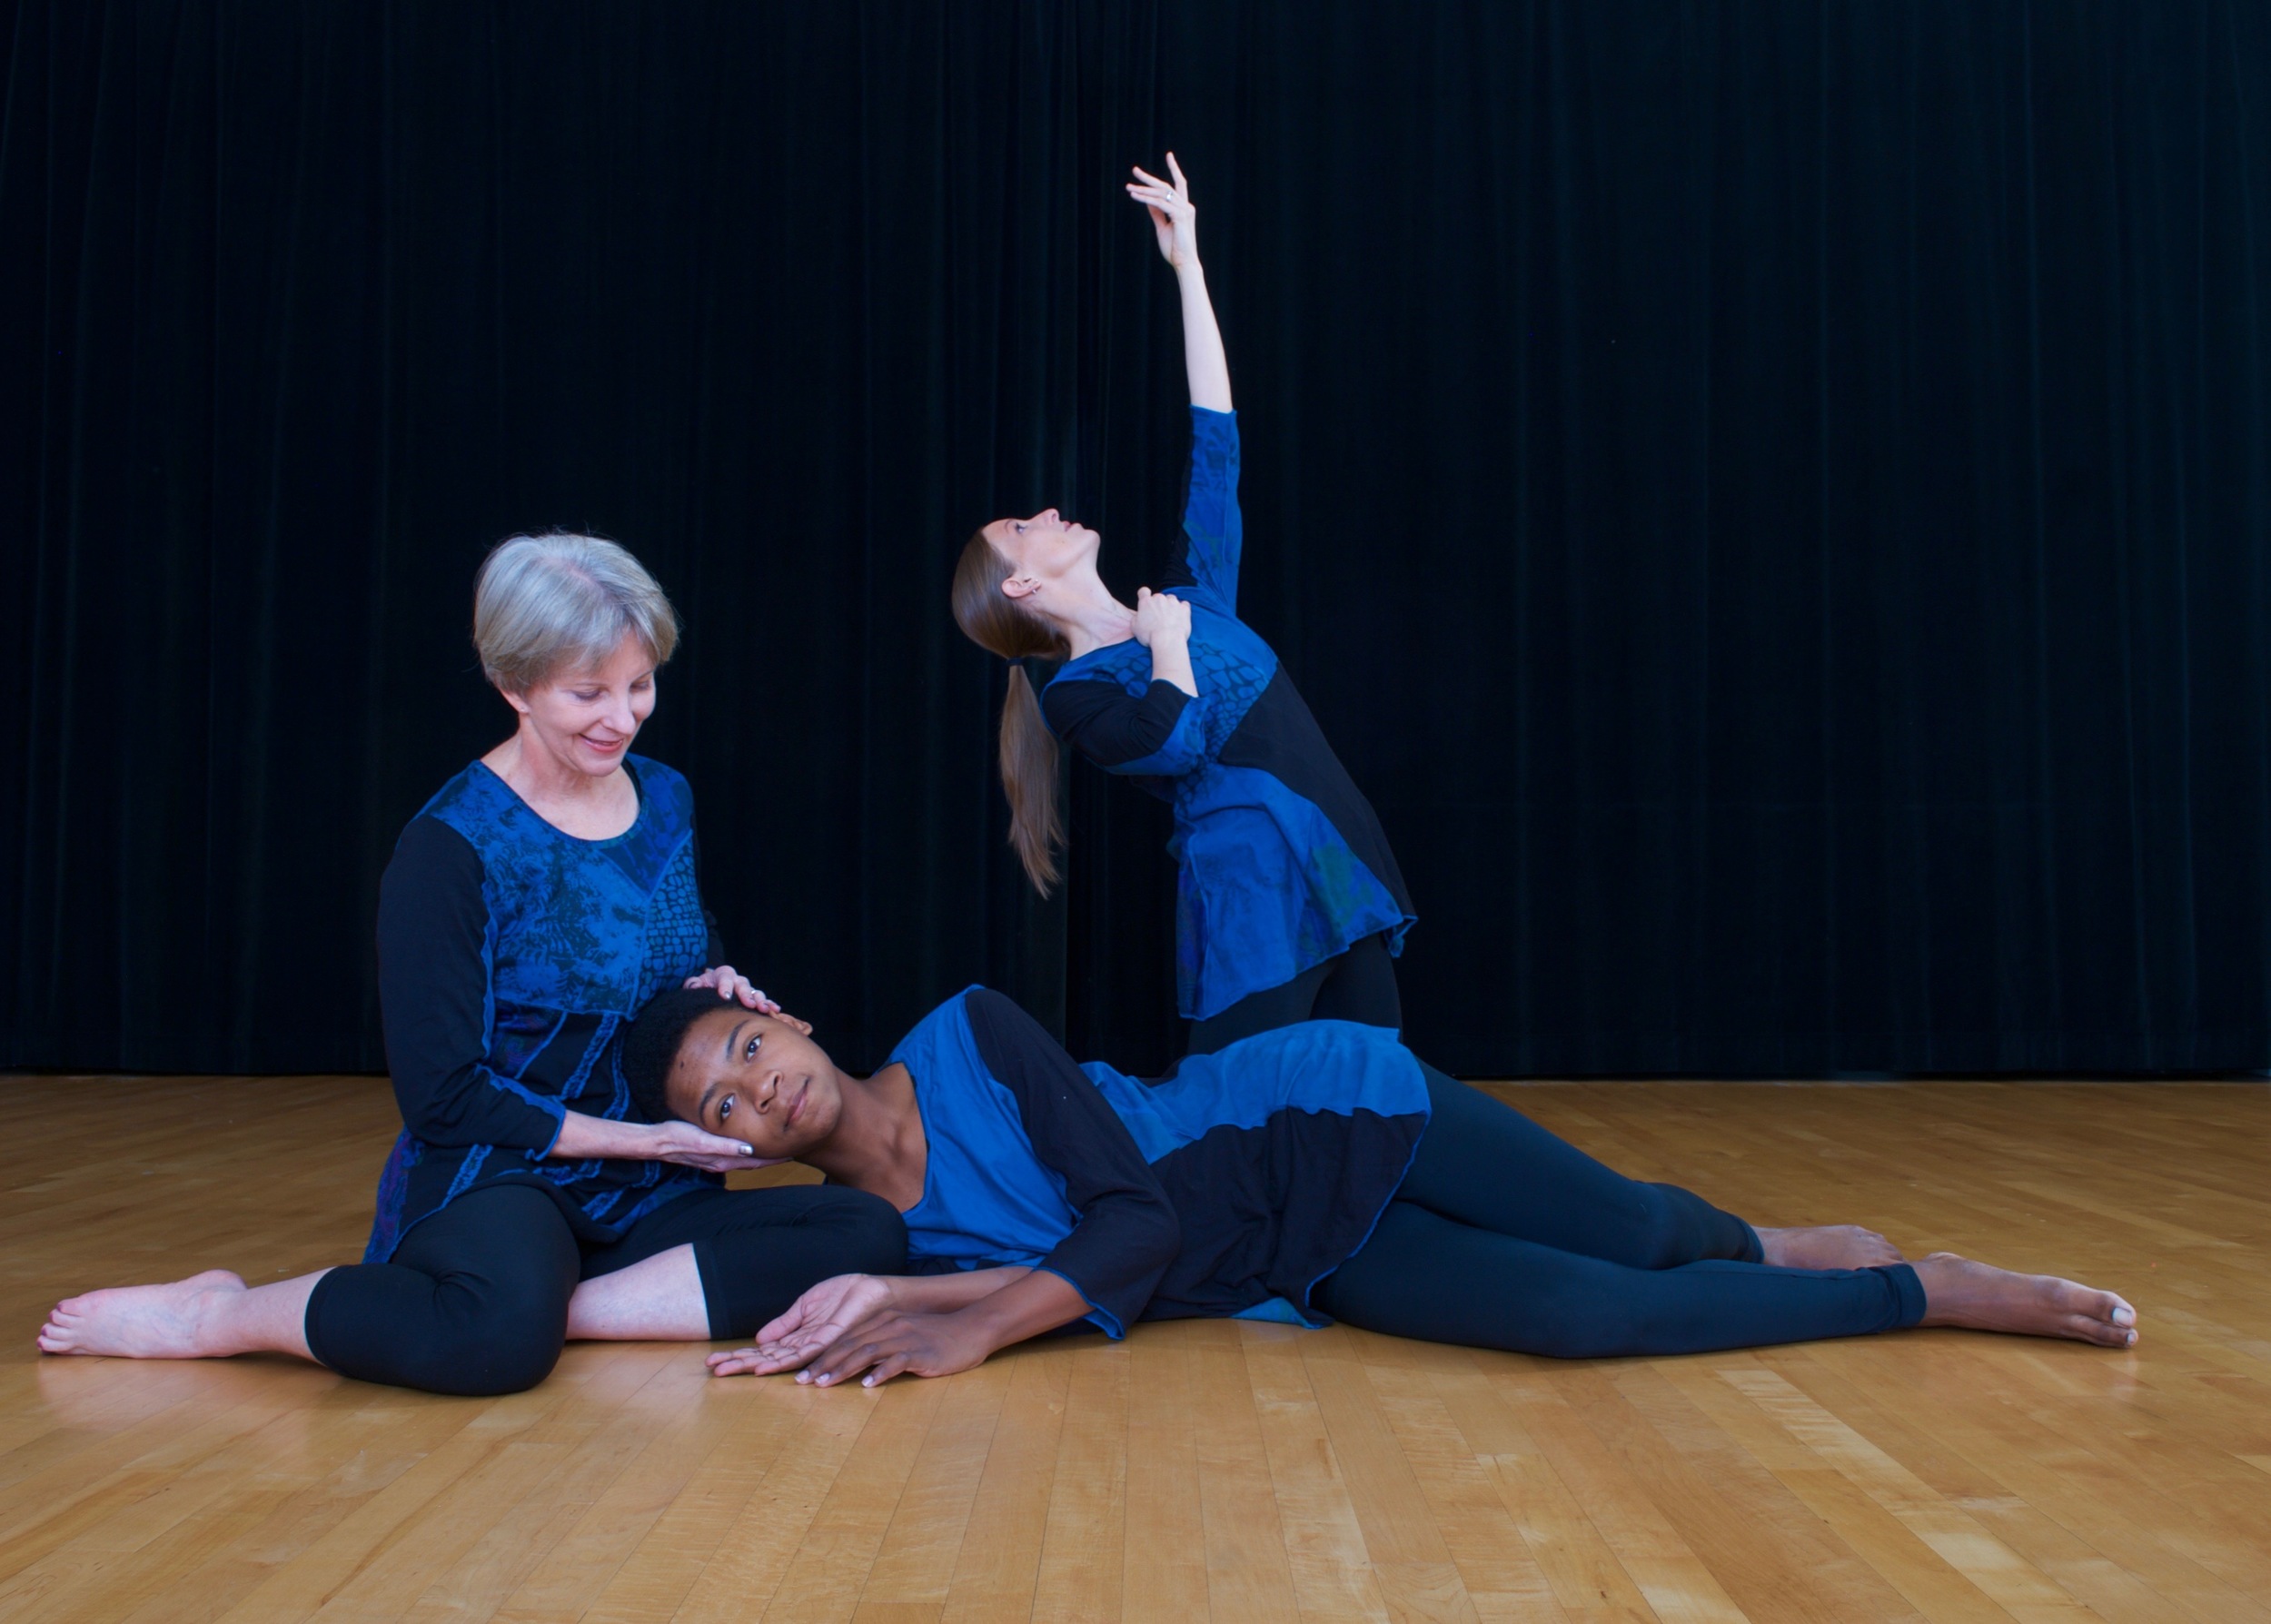 Dancers of all races and ages in a modern dance pose.